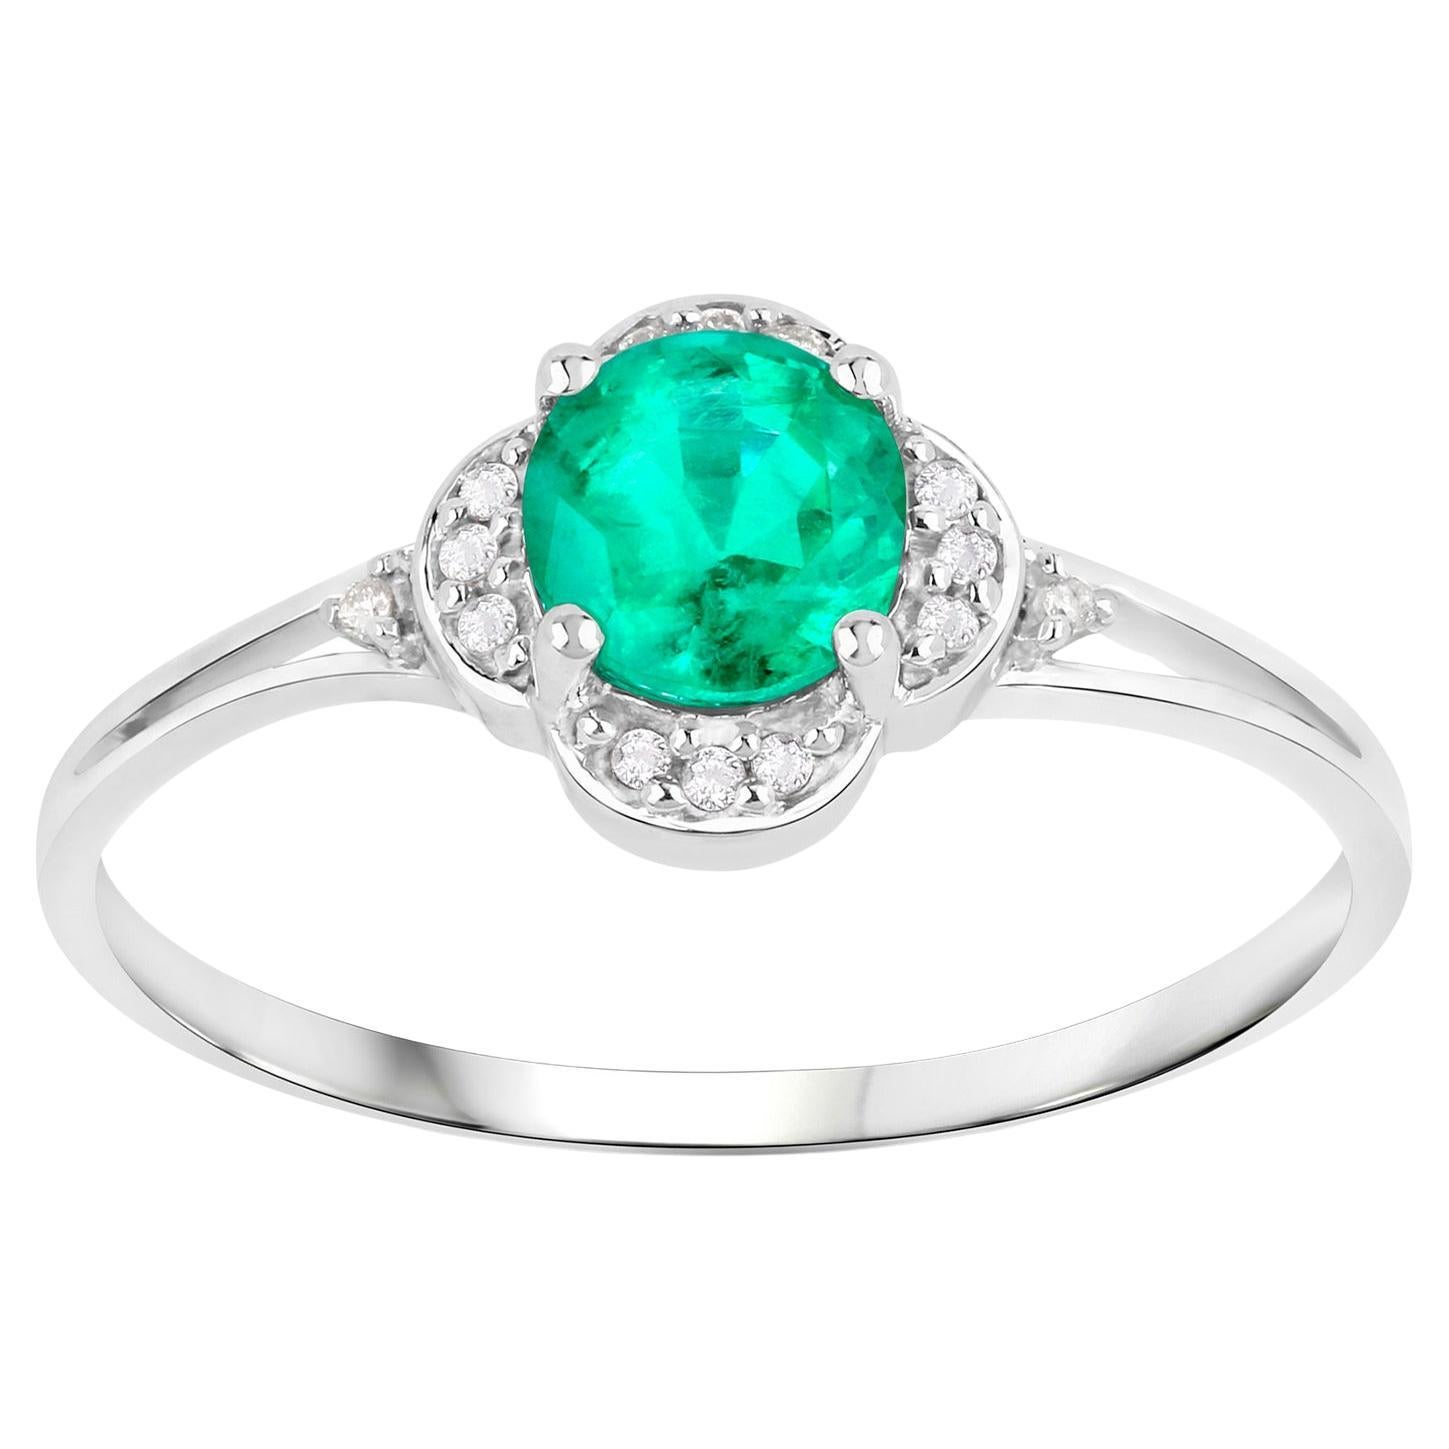 Natural Zambian Emerald Cocktail Ring With Diamonds 0.50 Carats 14K White Gold